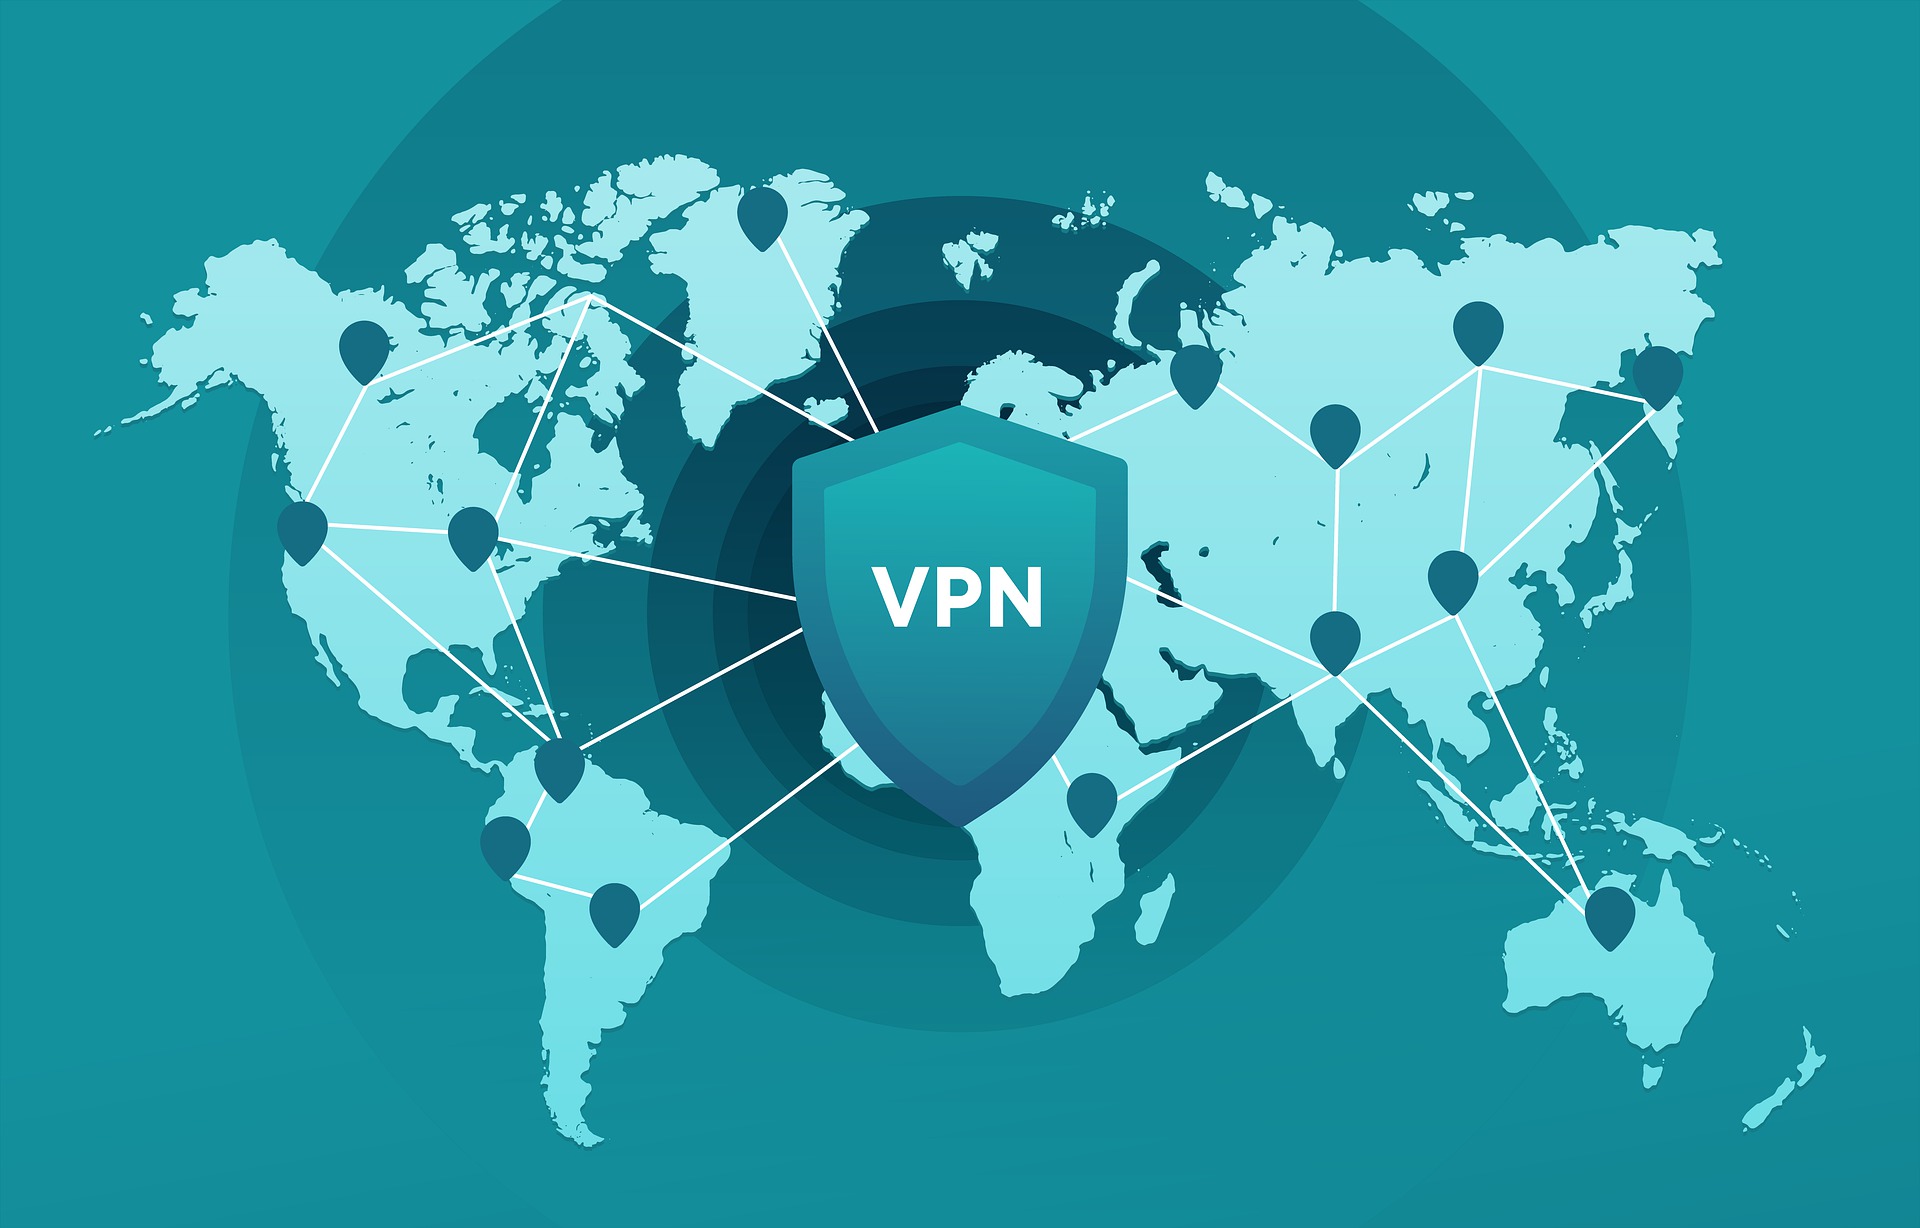 VPNs for Business